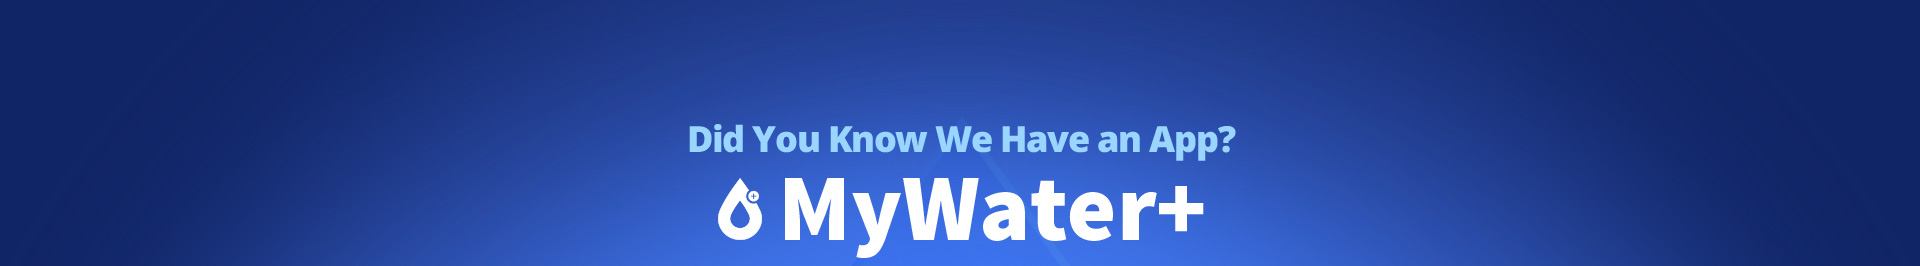 Try Our New App MyWater+